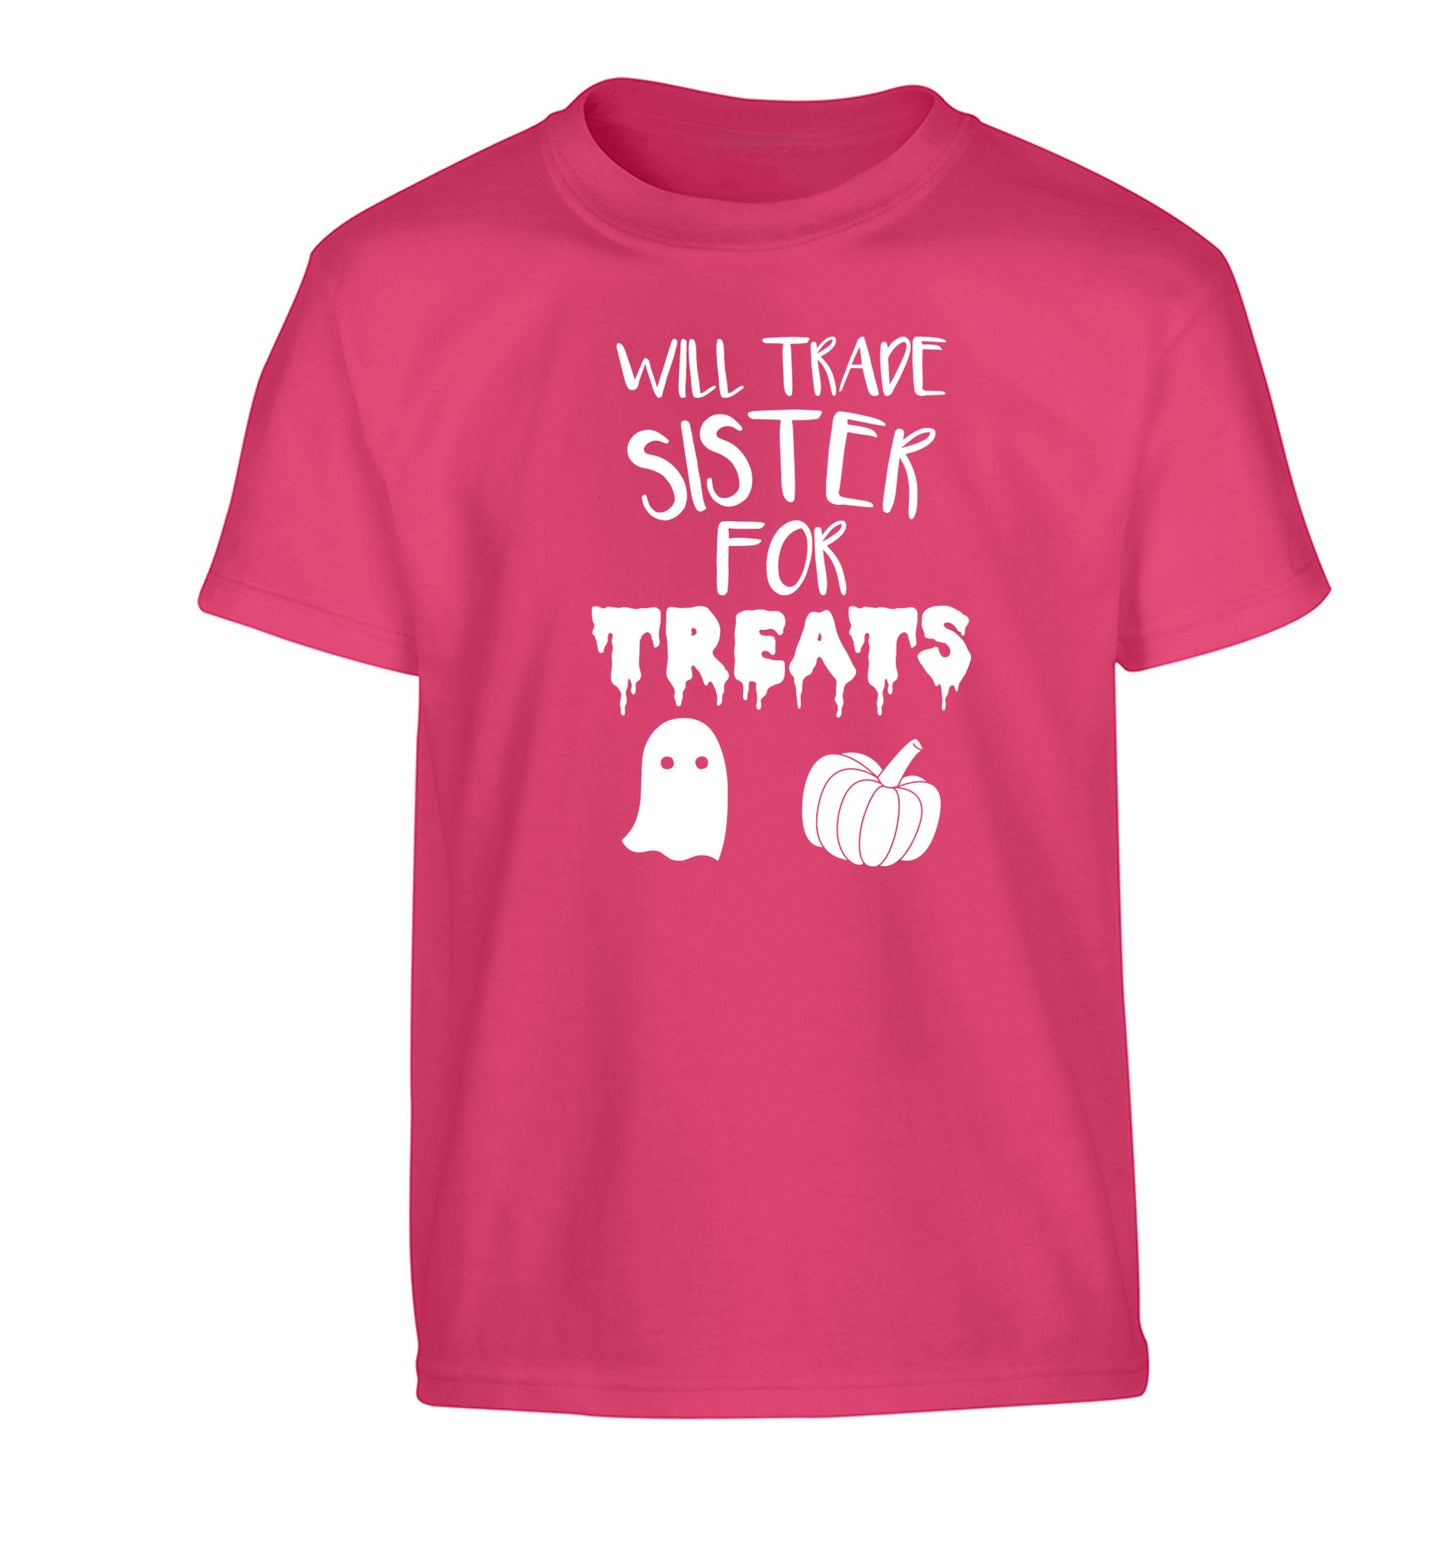 Will trade sister for treats Children's pink Tshirt 12-14 Years